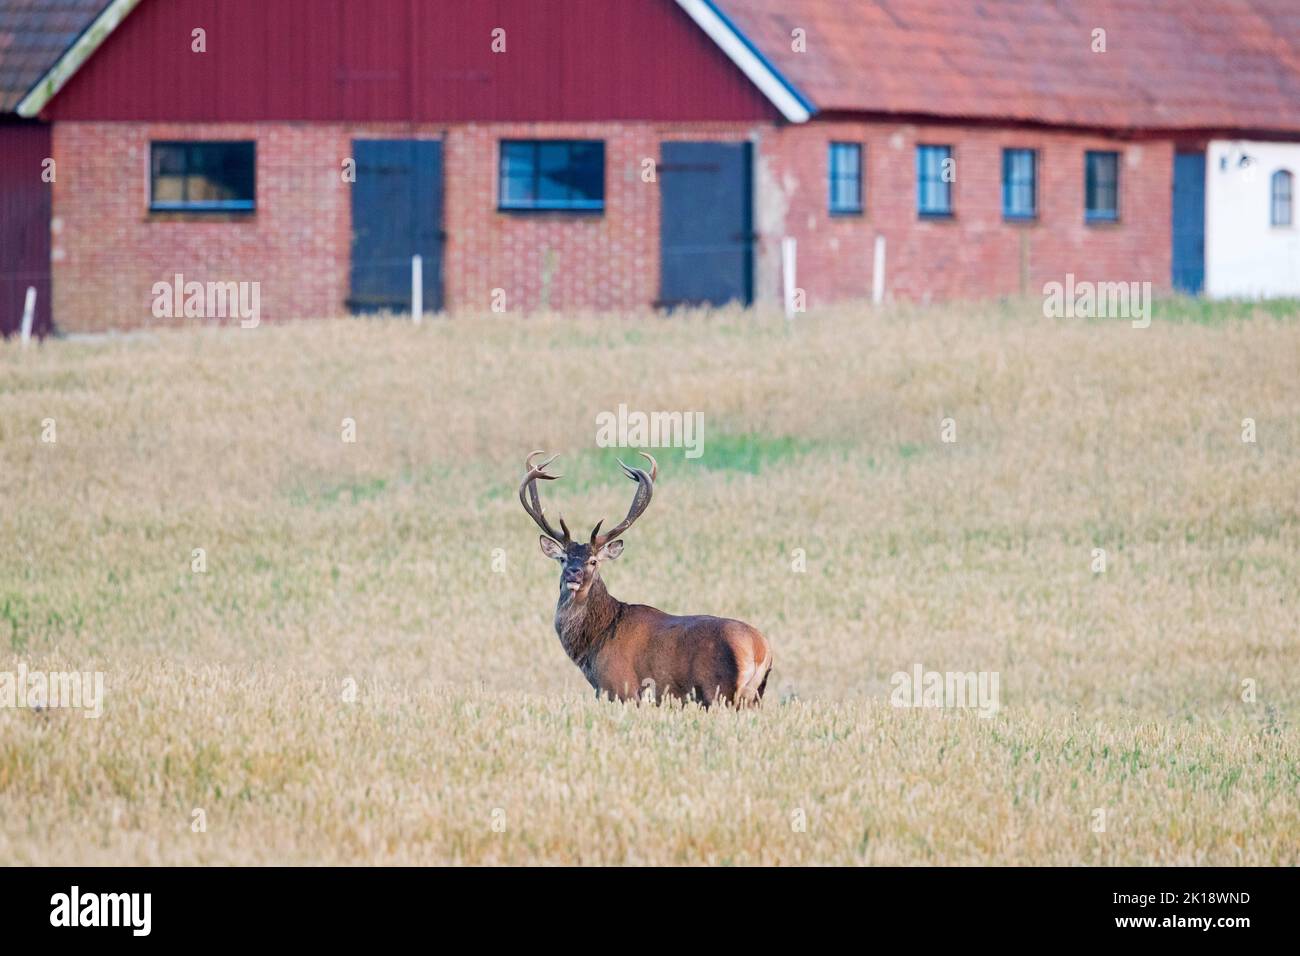 Red deer (Cervus elaphus) solitary stag standing in cereal field / wheat field in front of barn / farm building in summer, Scania / Skåne, Sweden Stock Photo